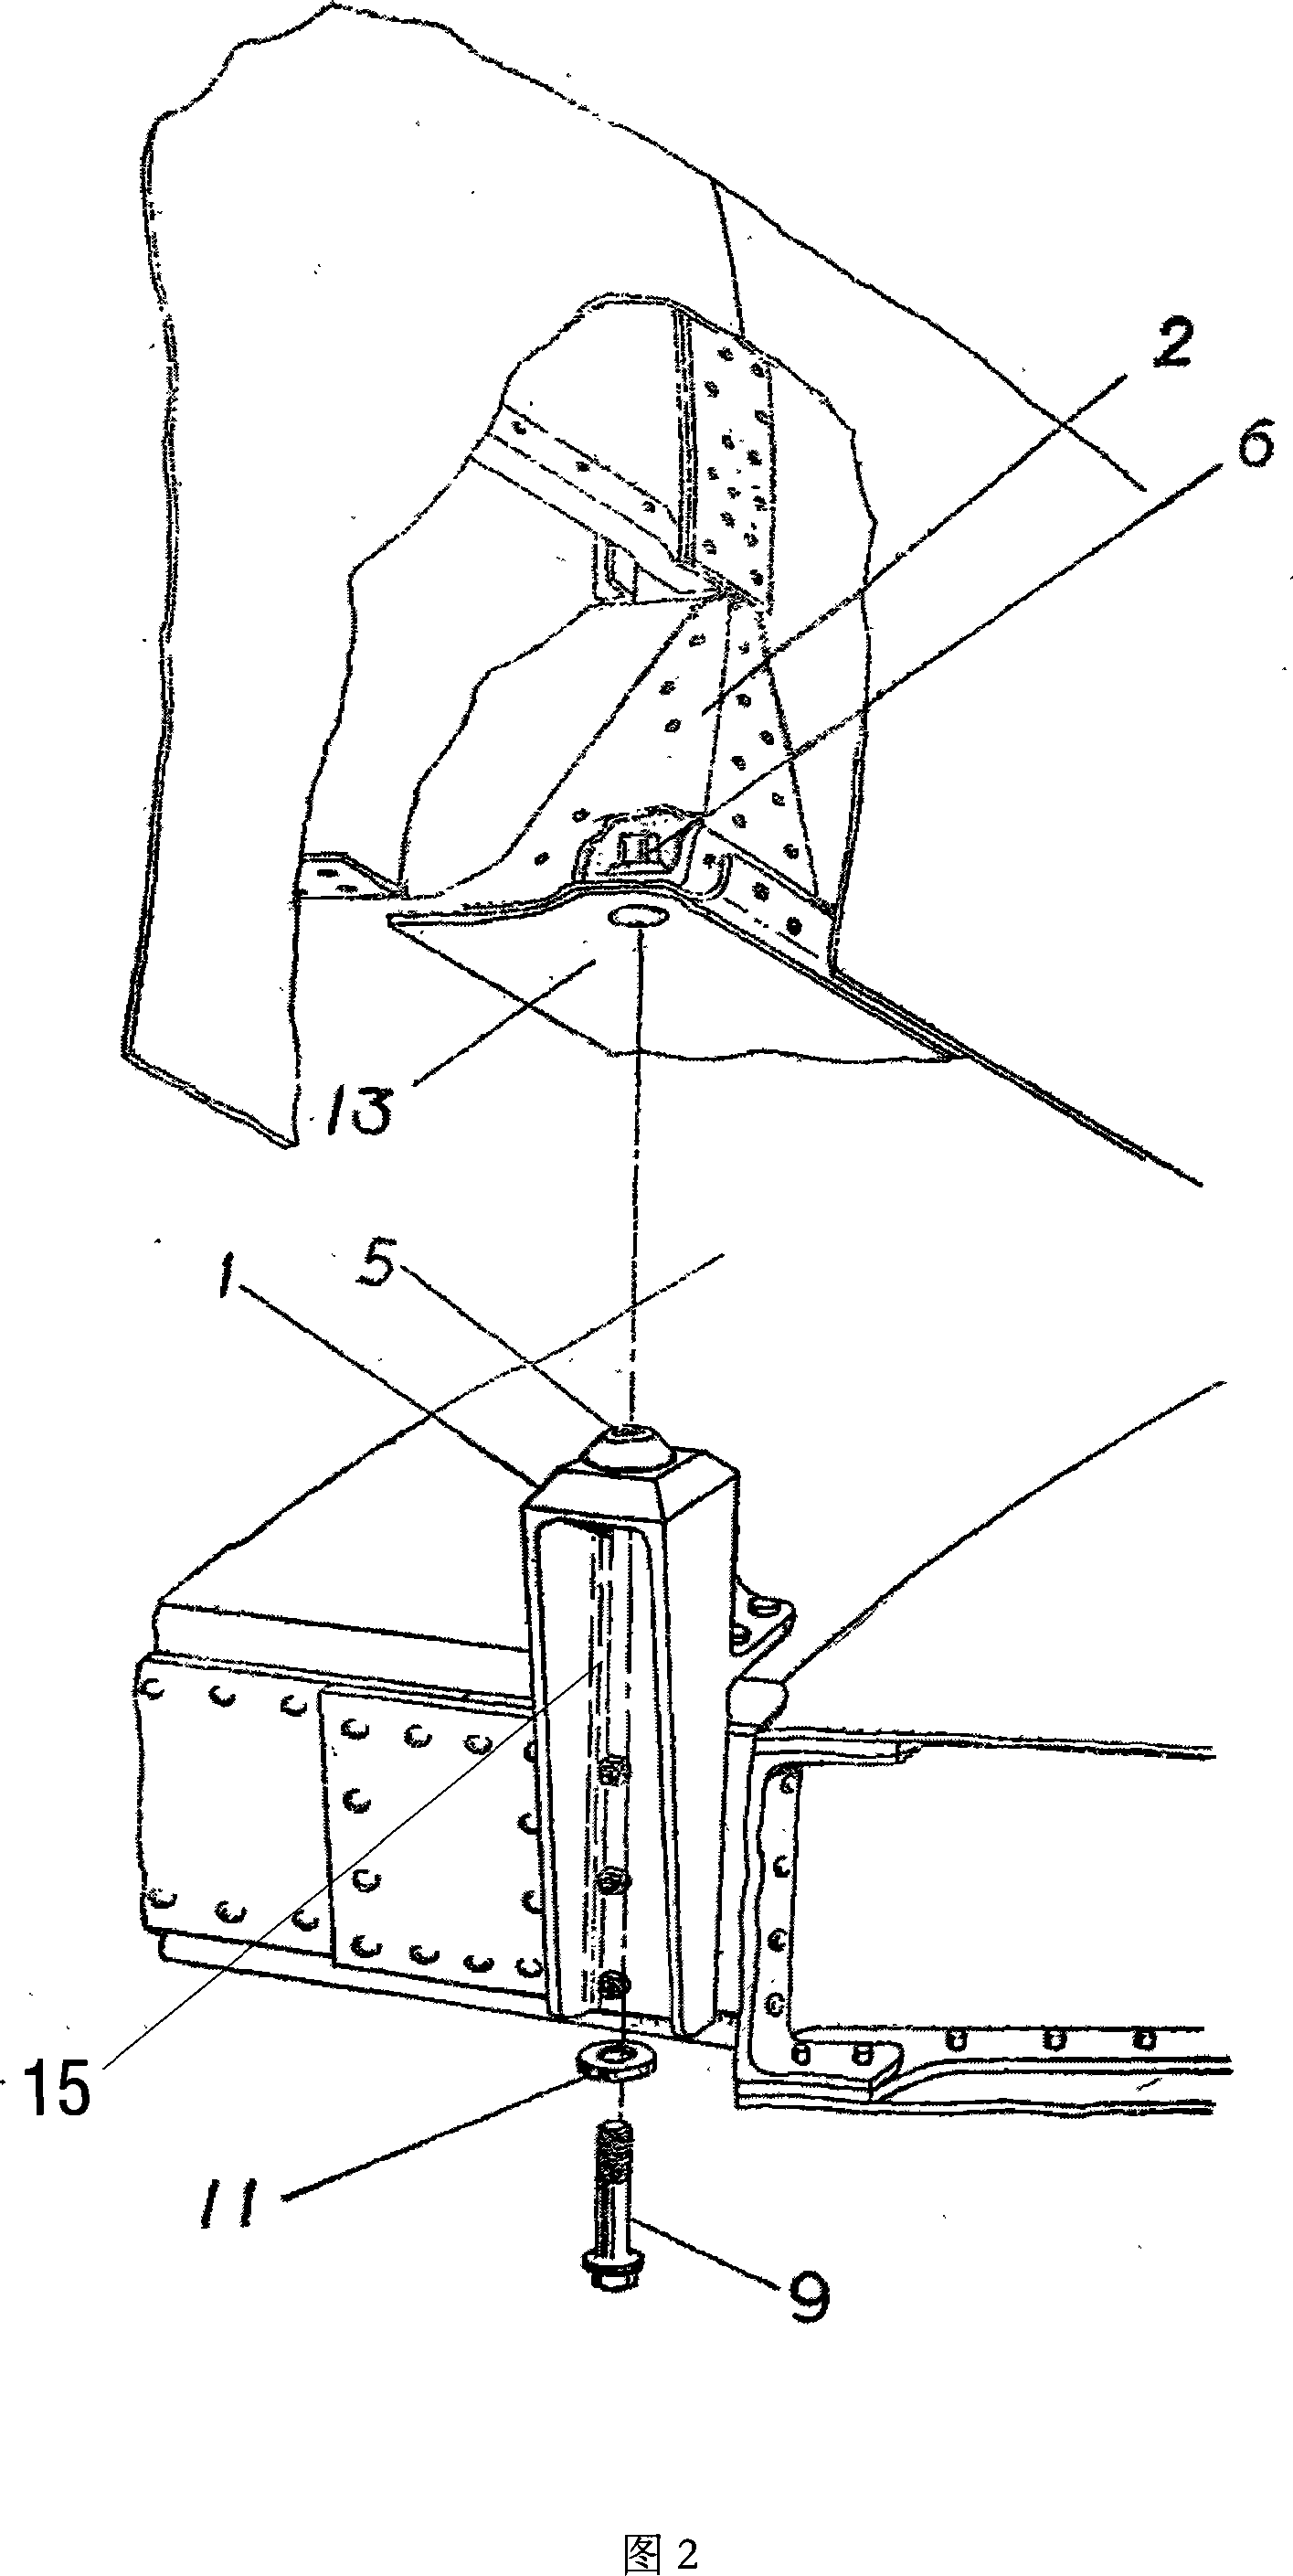 Connecting structure for unmanned aerial vehicle body and wing